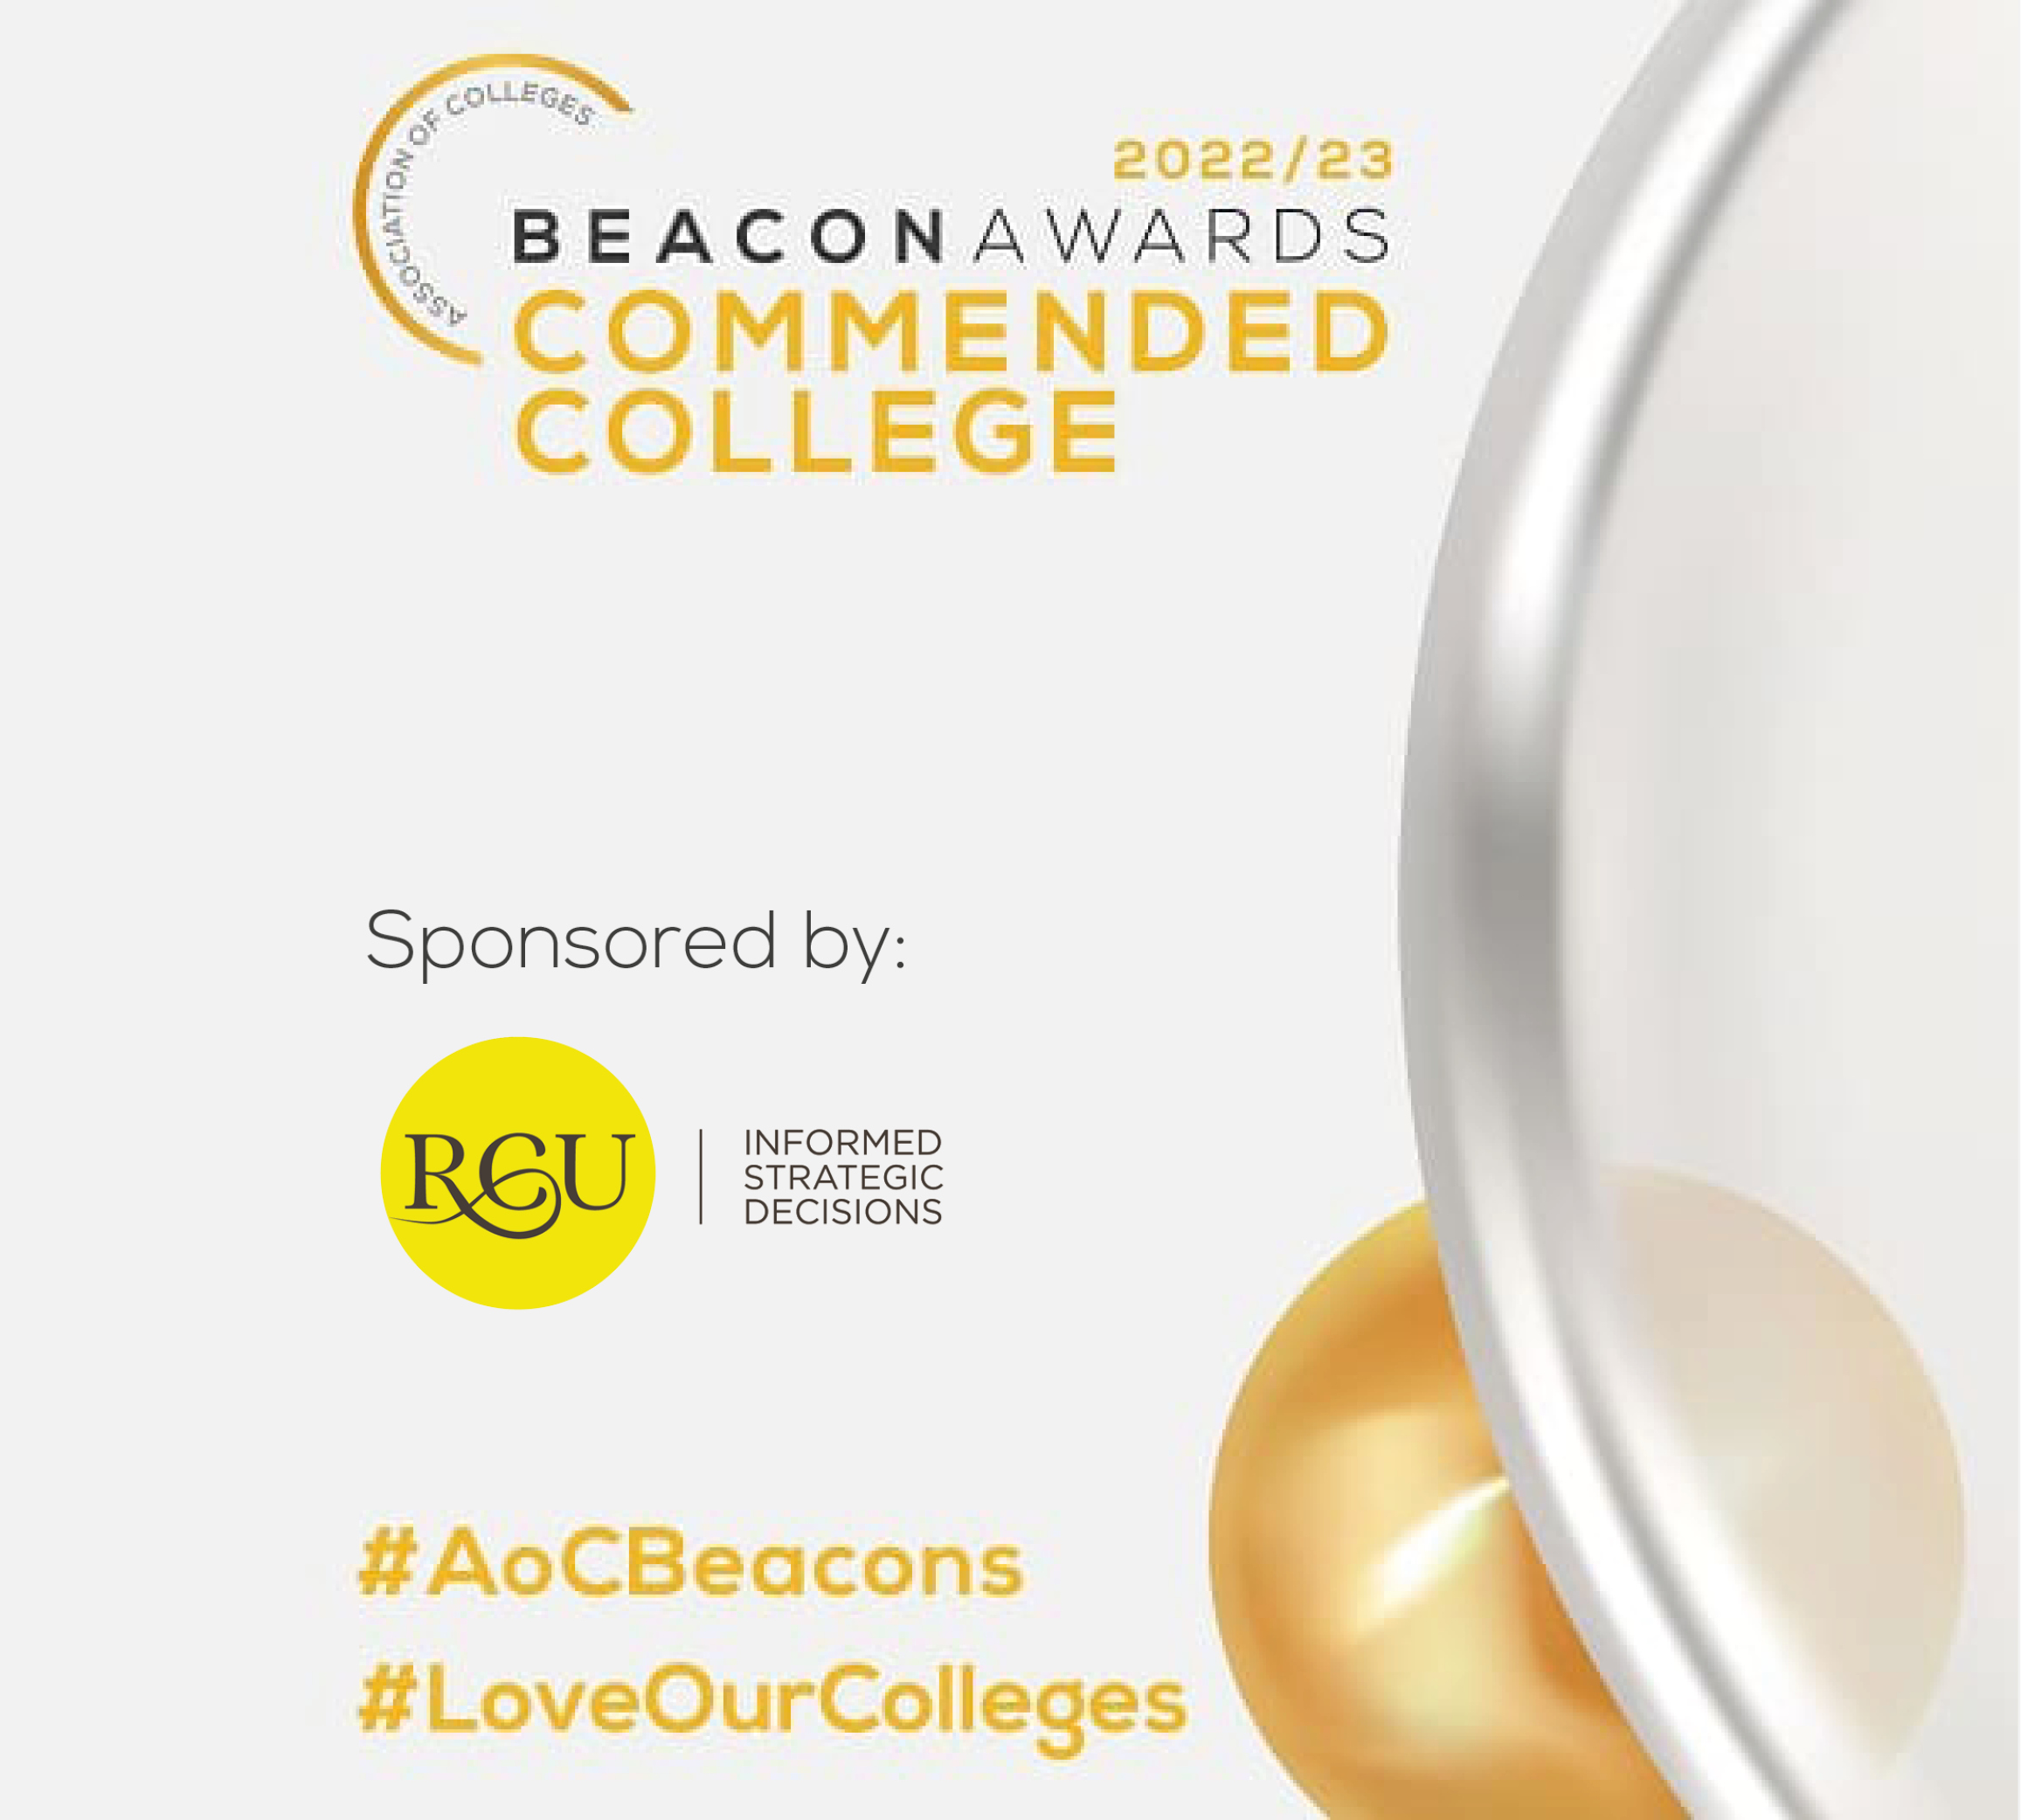 Beacon Awards 2022/23 Commended College